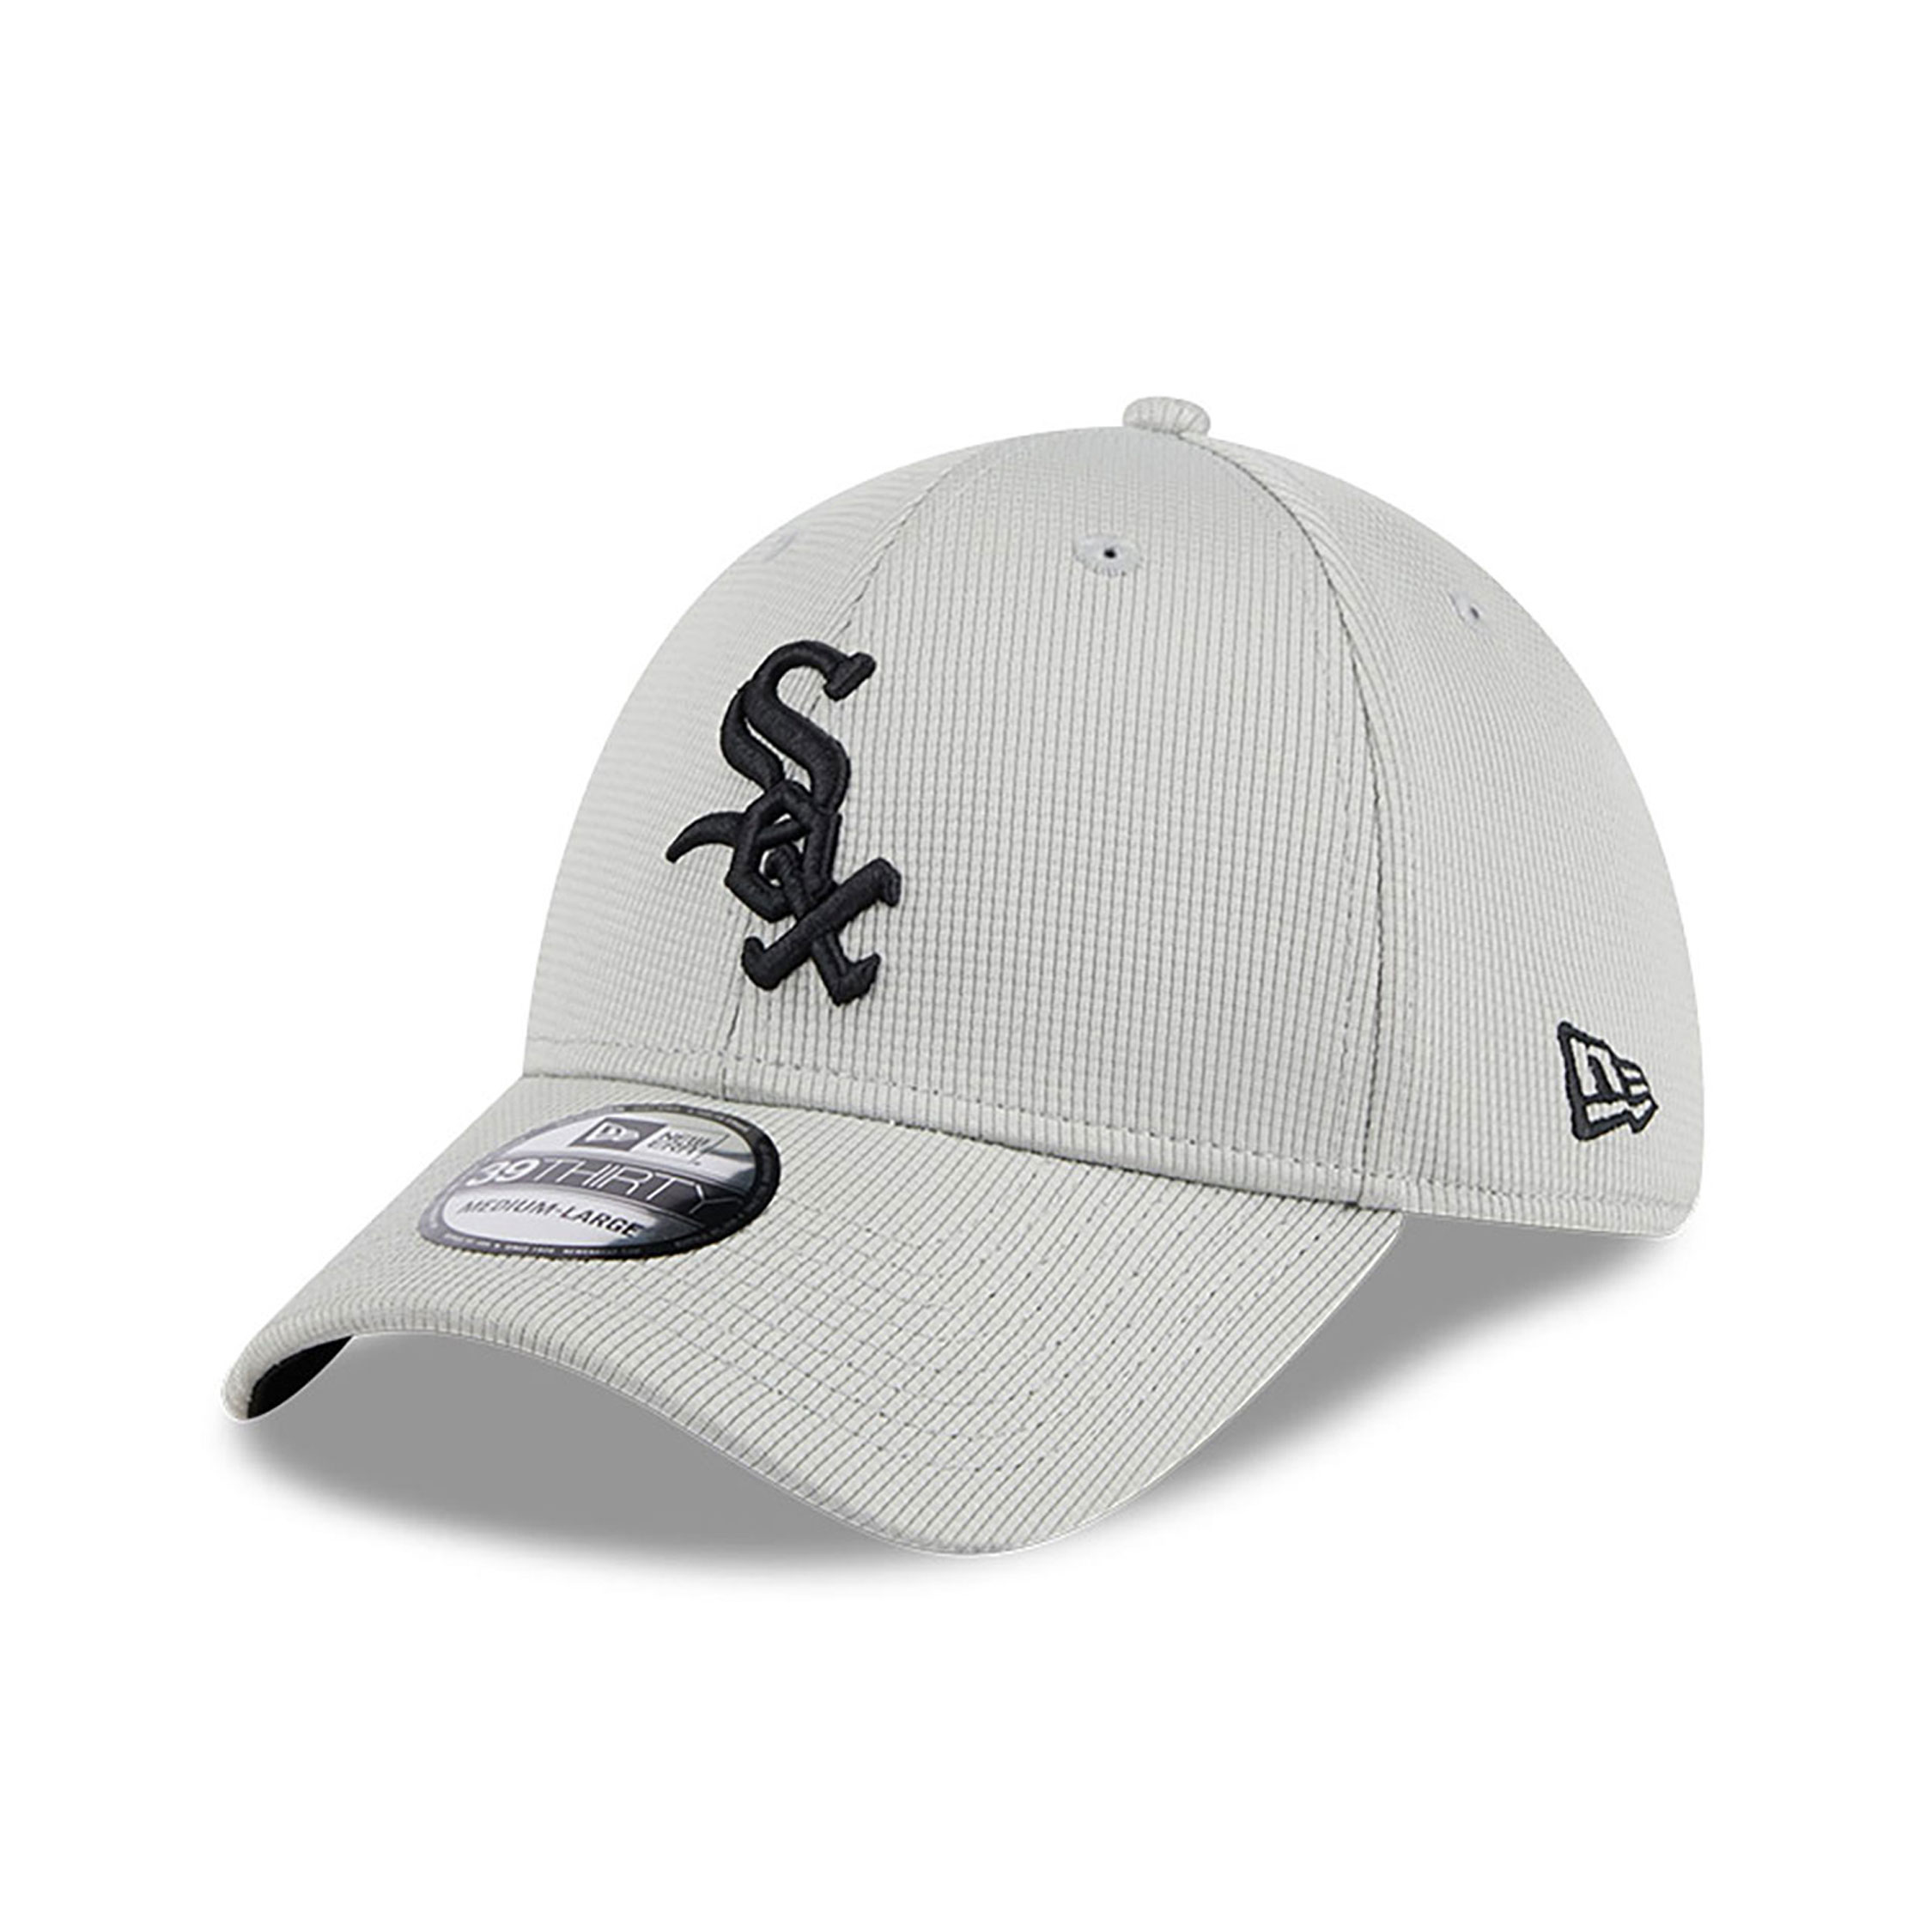 Chicago White Sox Spring Training Light Grey 39THIRTY Stretch Fit Cap